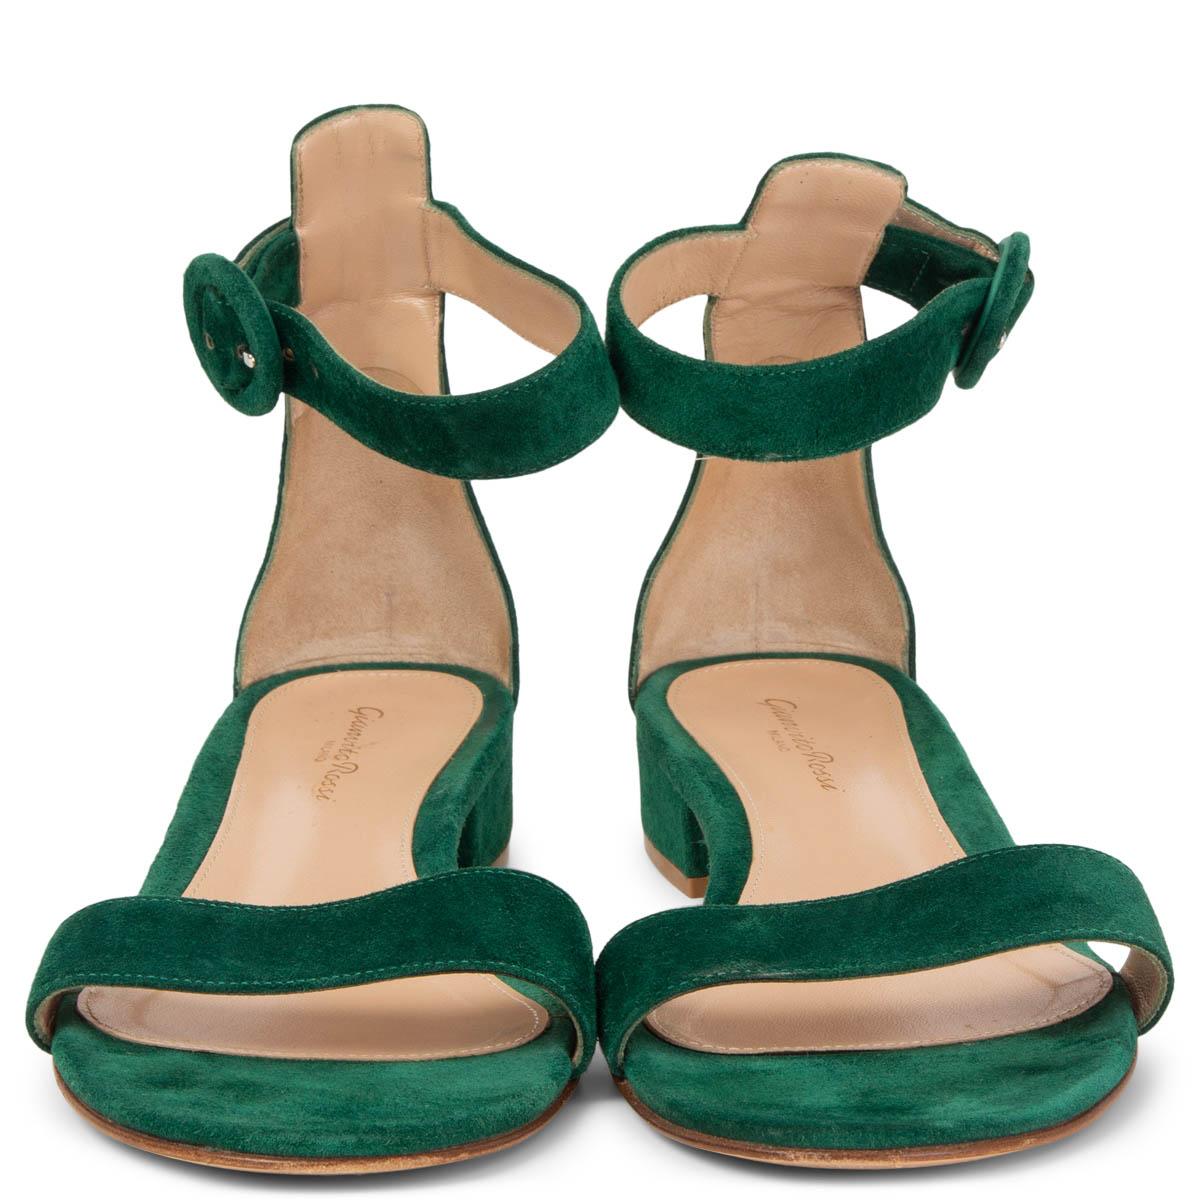 100% authentic Gianvito Rossi Portofino 20 Sandals in green suede leather which feature a 20mm block heel. Have been worn once or twice and are in excellent condition. 

Measurements
Imprinted Size	38
Shoe Size	38
Inside Sole	25cm (9.8in)
Width	8cm